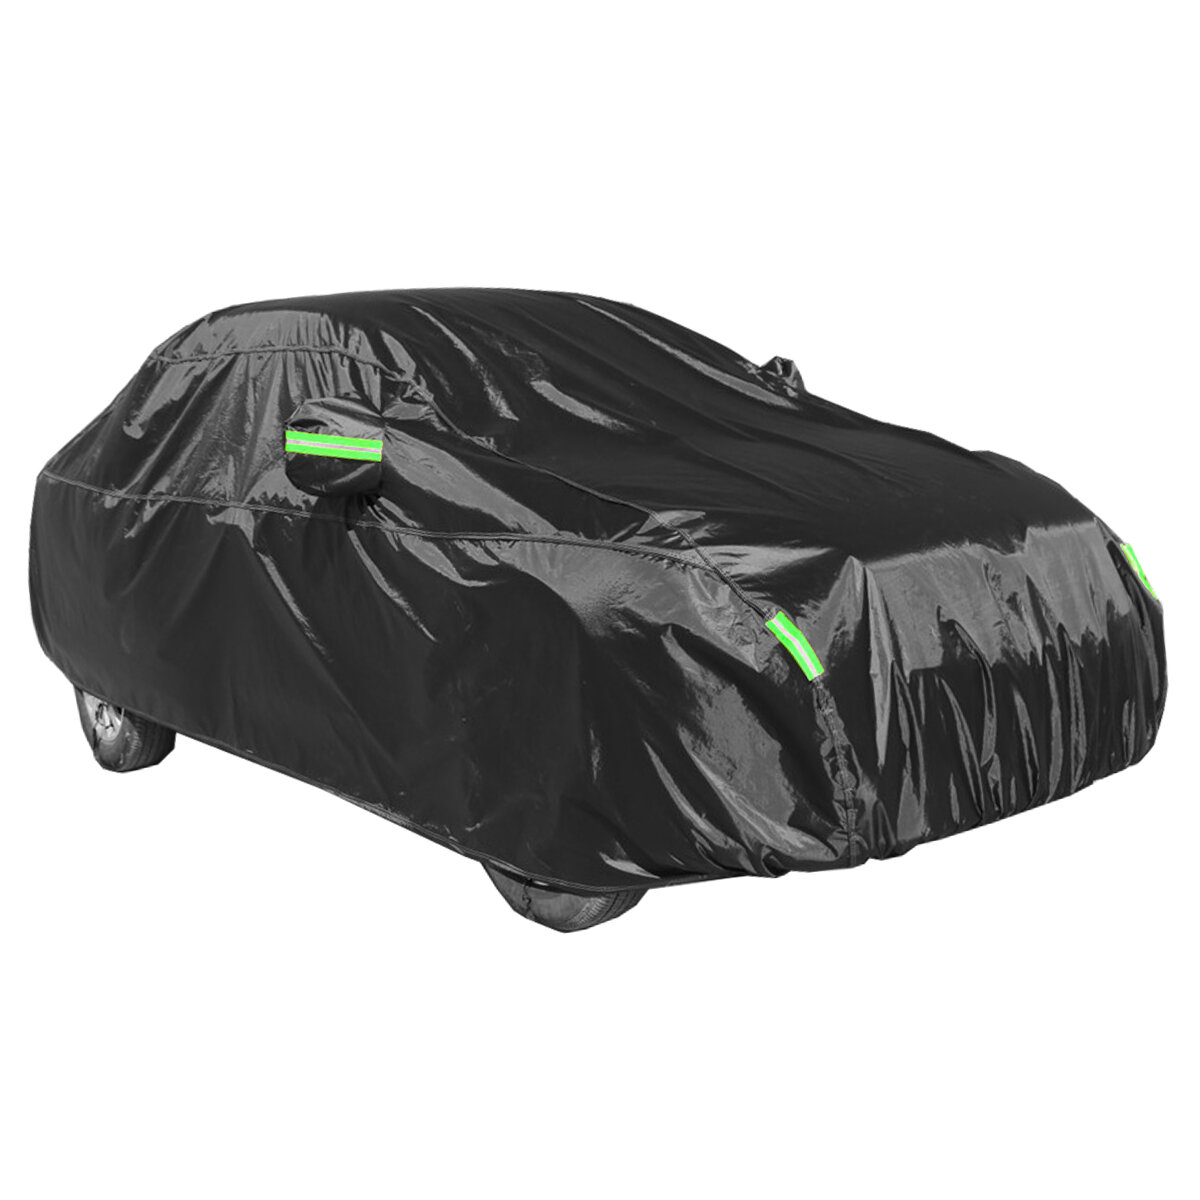 Image of 210T Silver Coated Car Cover Dustproof Sunscreen Rainproof Car Protected Full Cover